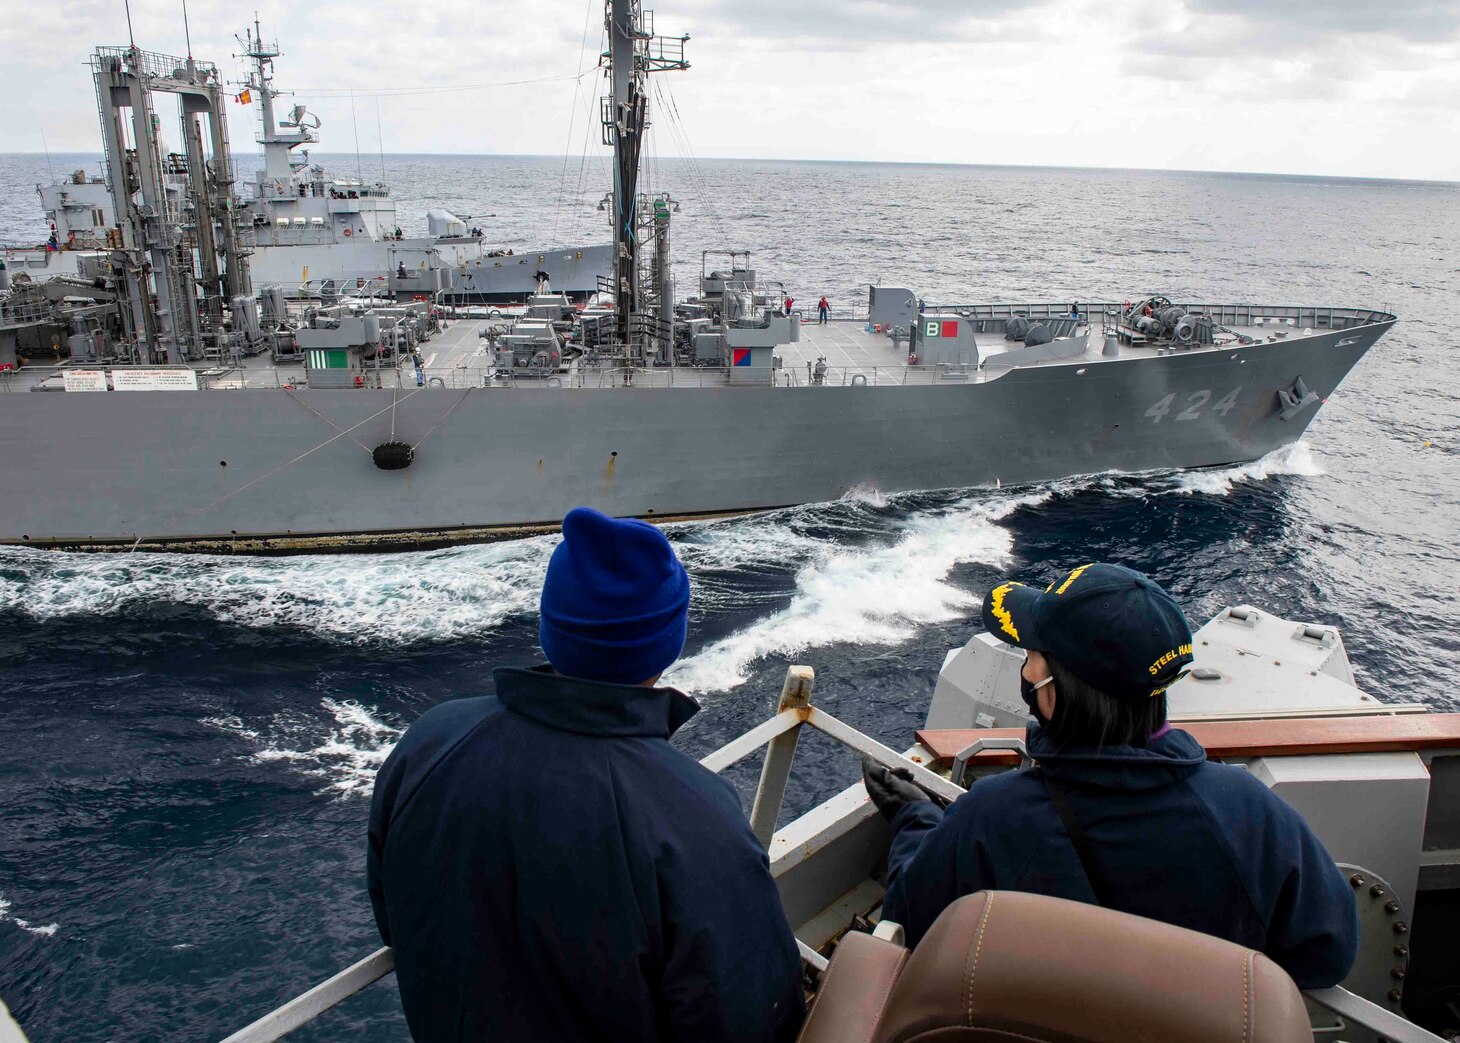 The Arleigh Burke-class guided-missile destroyer USS Curtis Wilbur (DDG 54) conducts a tri-lateral replenishment-at-sea with the Japanese Towada-class replenishment ship JS Hamana (AOE 424) and the French Floreal-class light frigate FNS Prairial (F731). Curtis Wilbur is assigned to Destroyer Squadron (DESRON) 15, the Navy's largest forward-deployed DESRON and the U.S. 7th Fleet's principal surface force.